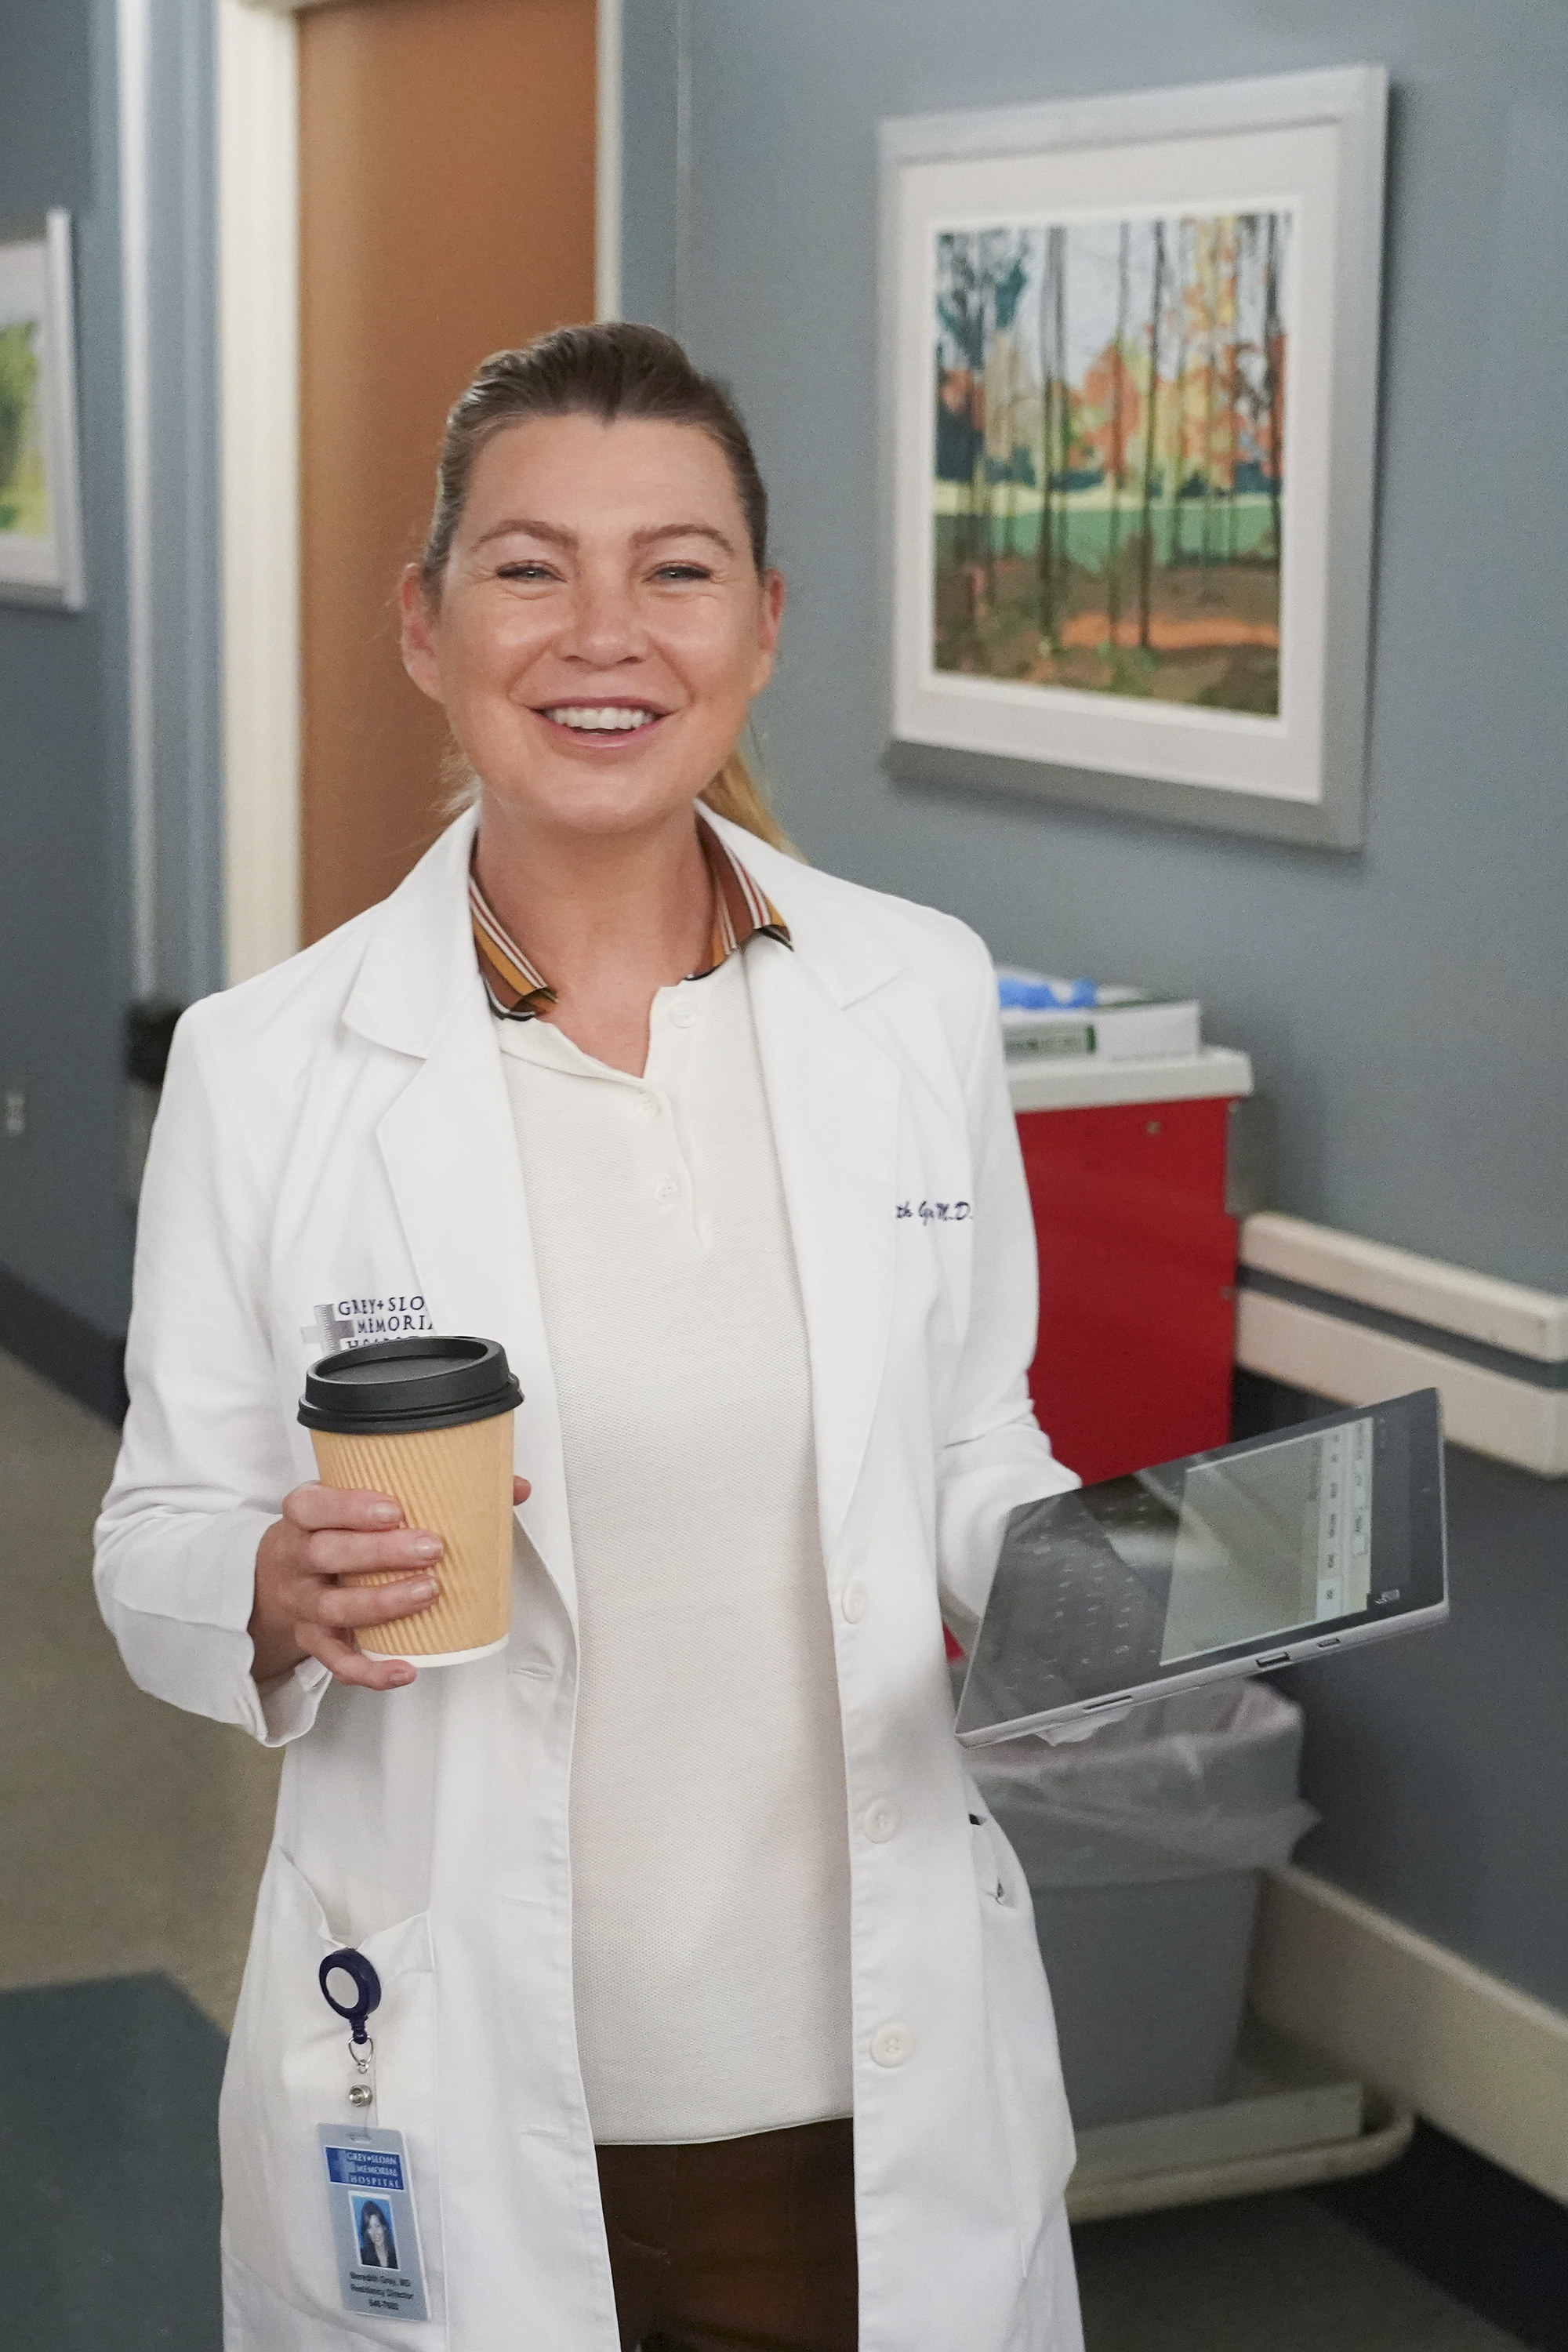 ellen in character in her doctor&#x27;s coat holding a tablet and a coffee